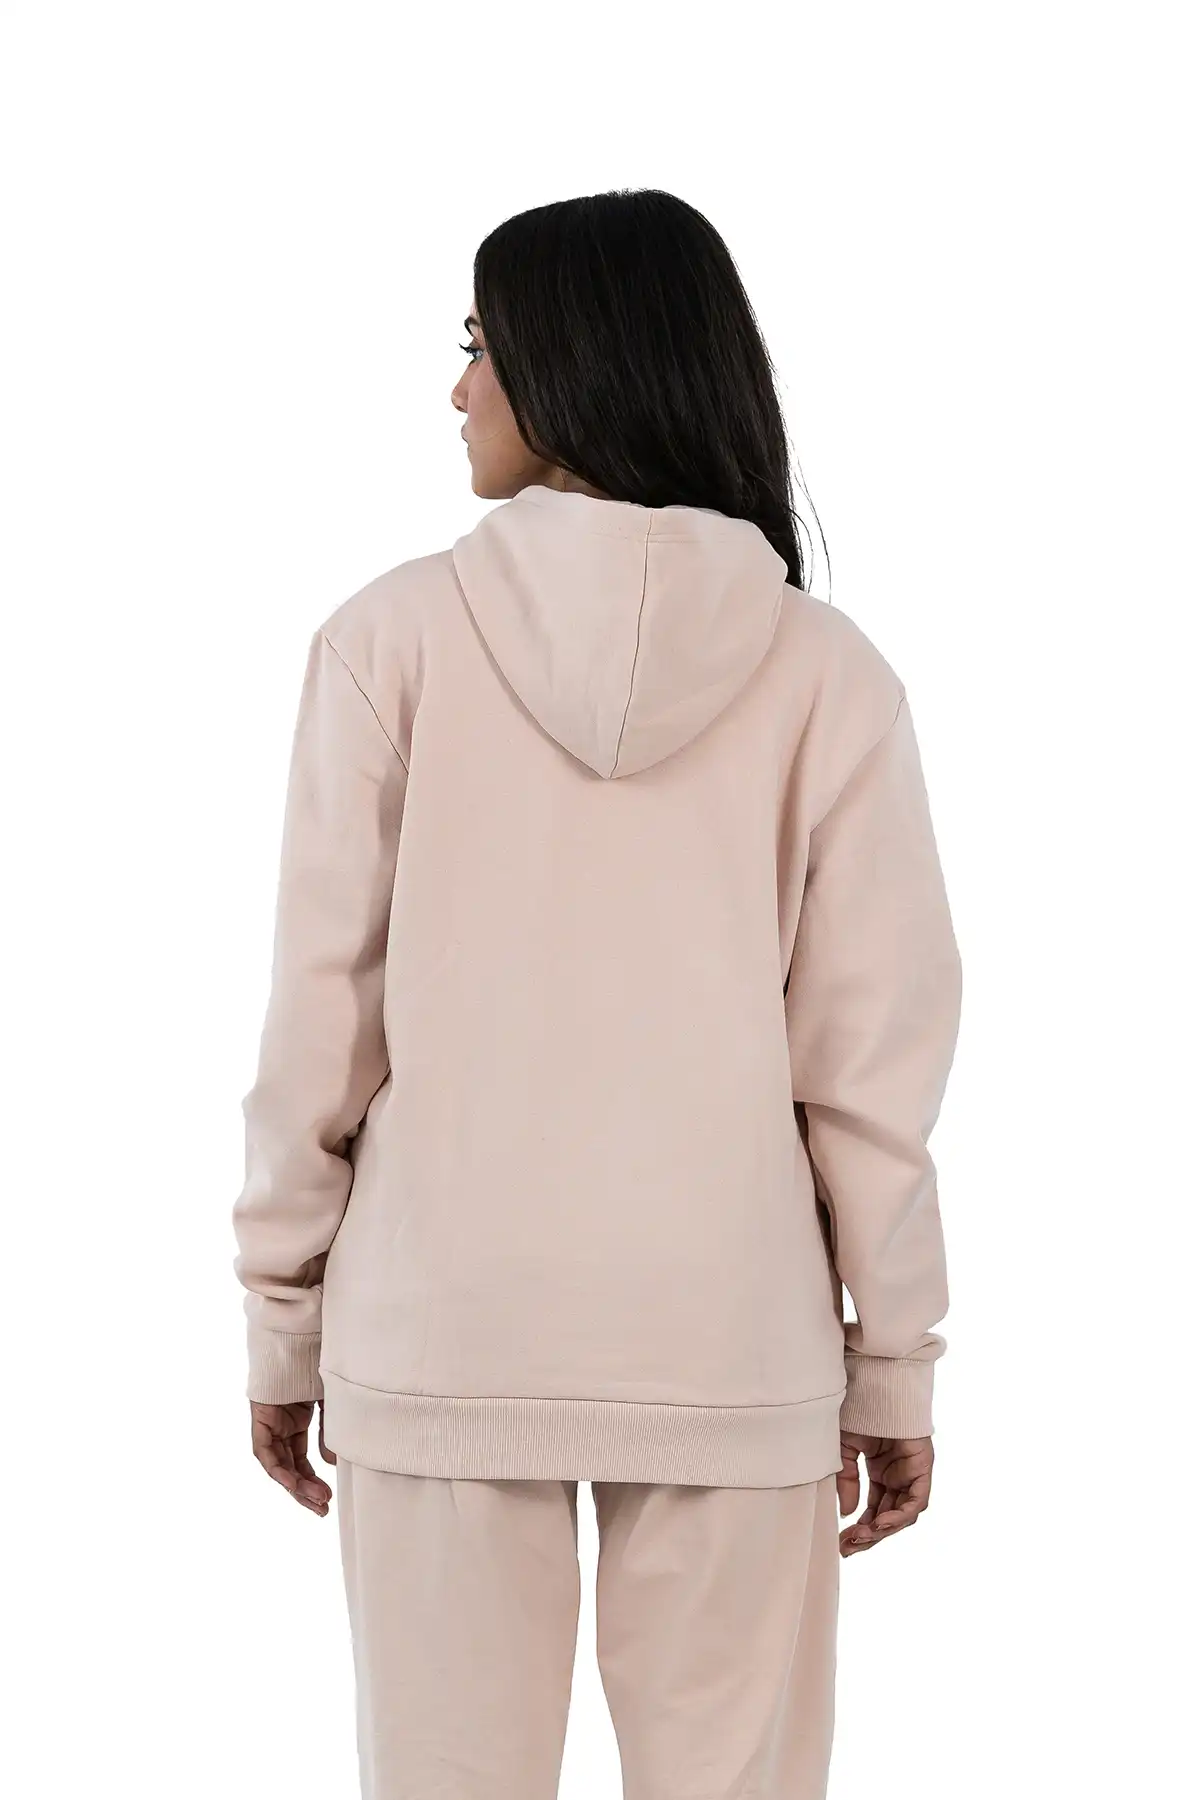 Unisex Relaxed Fit Hoodie - Peachy Pink